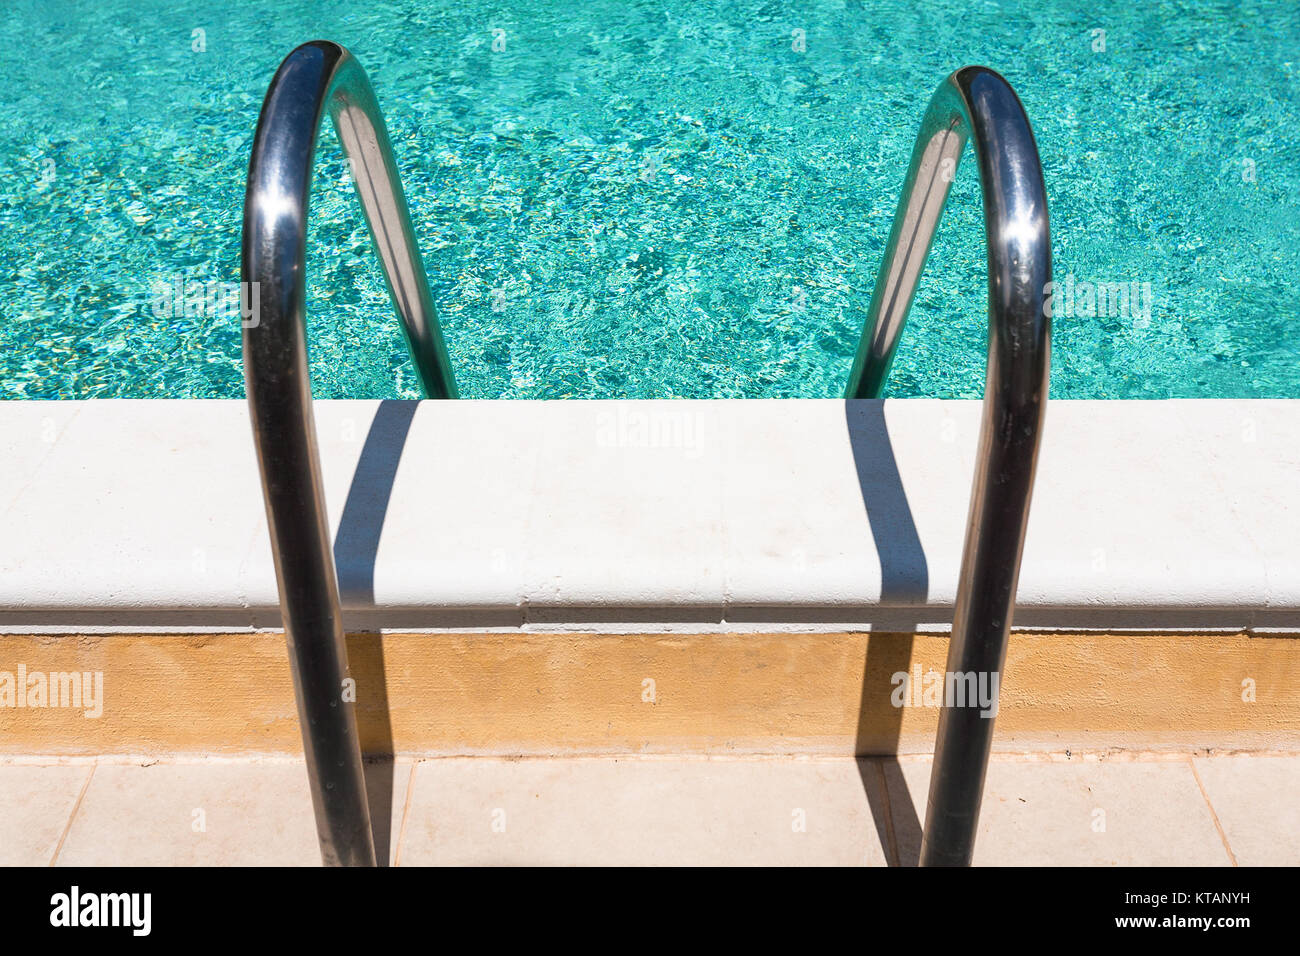 handles of outdoor swimming pool Stock Photo